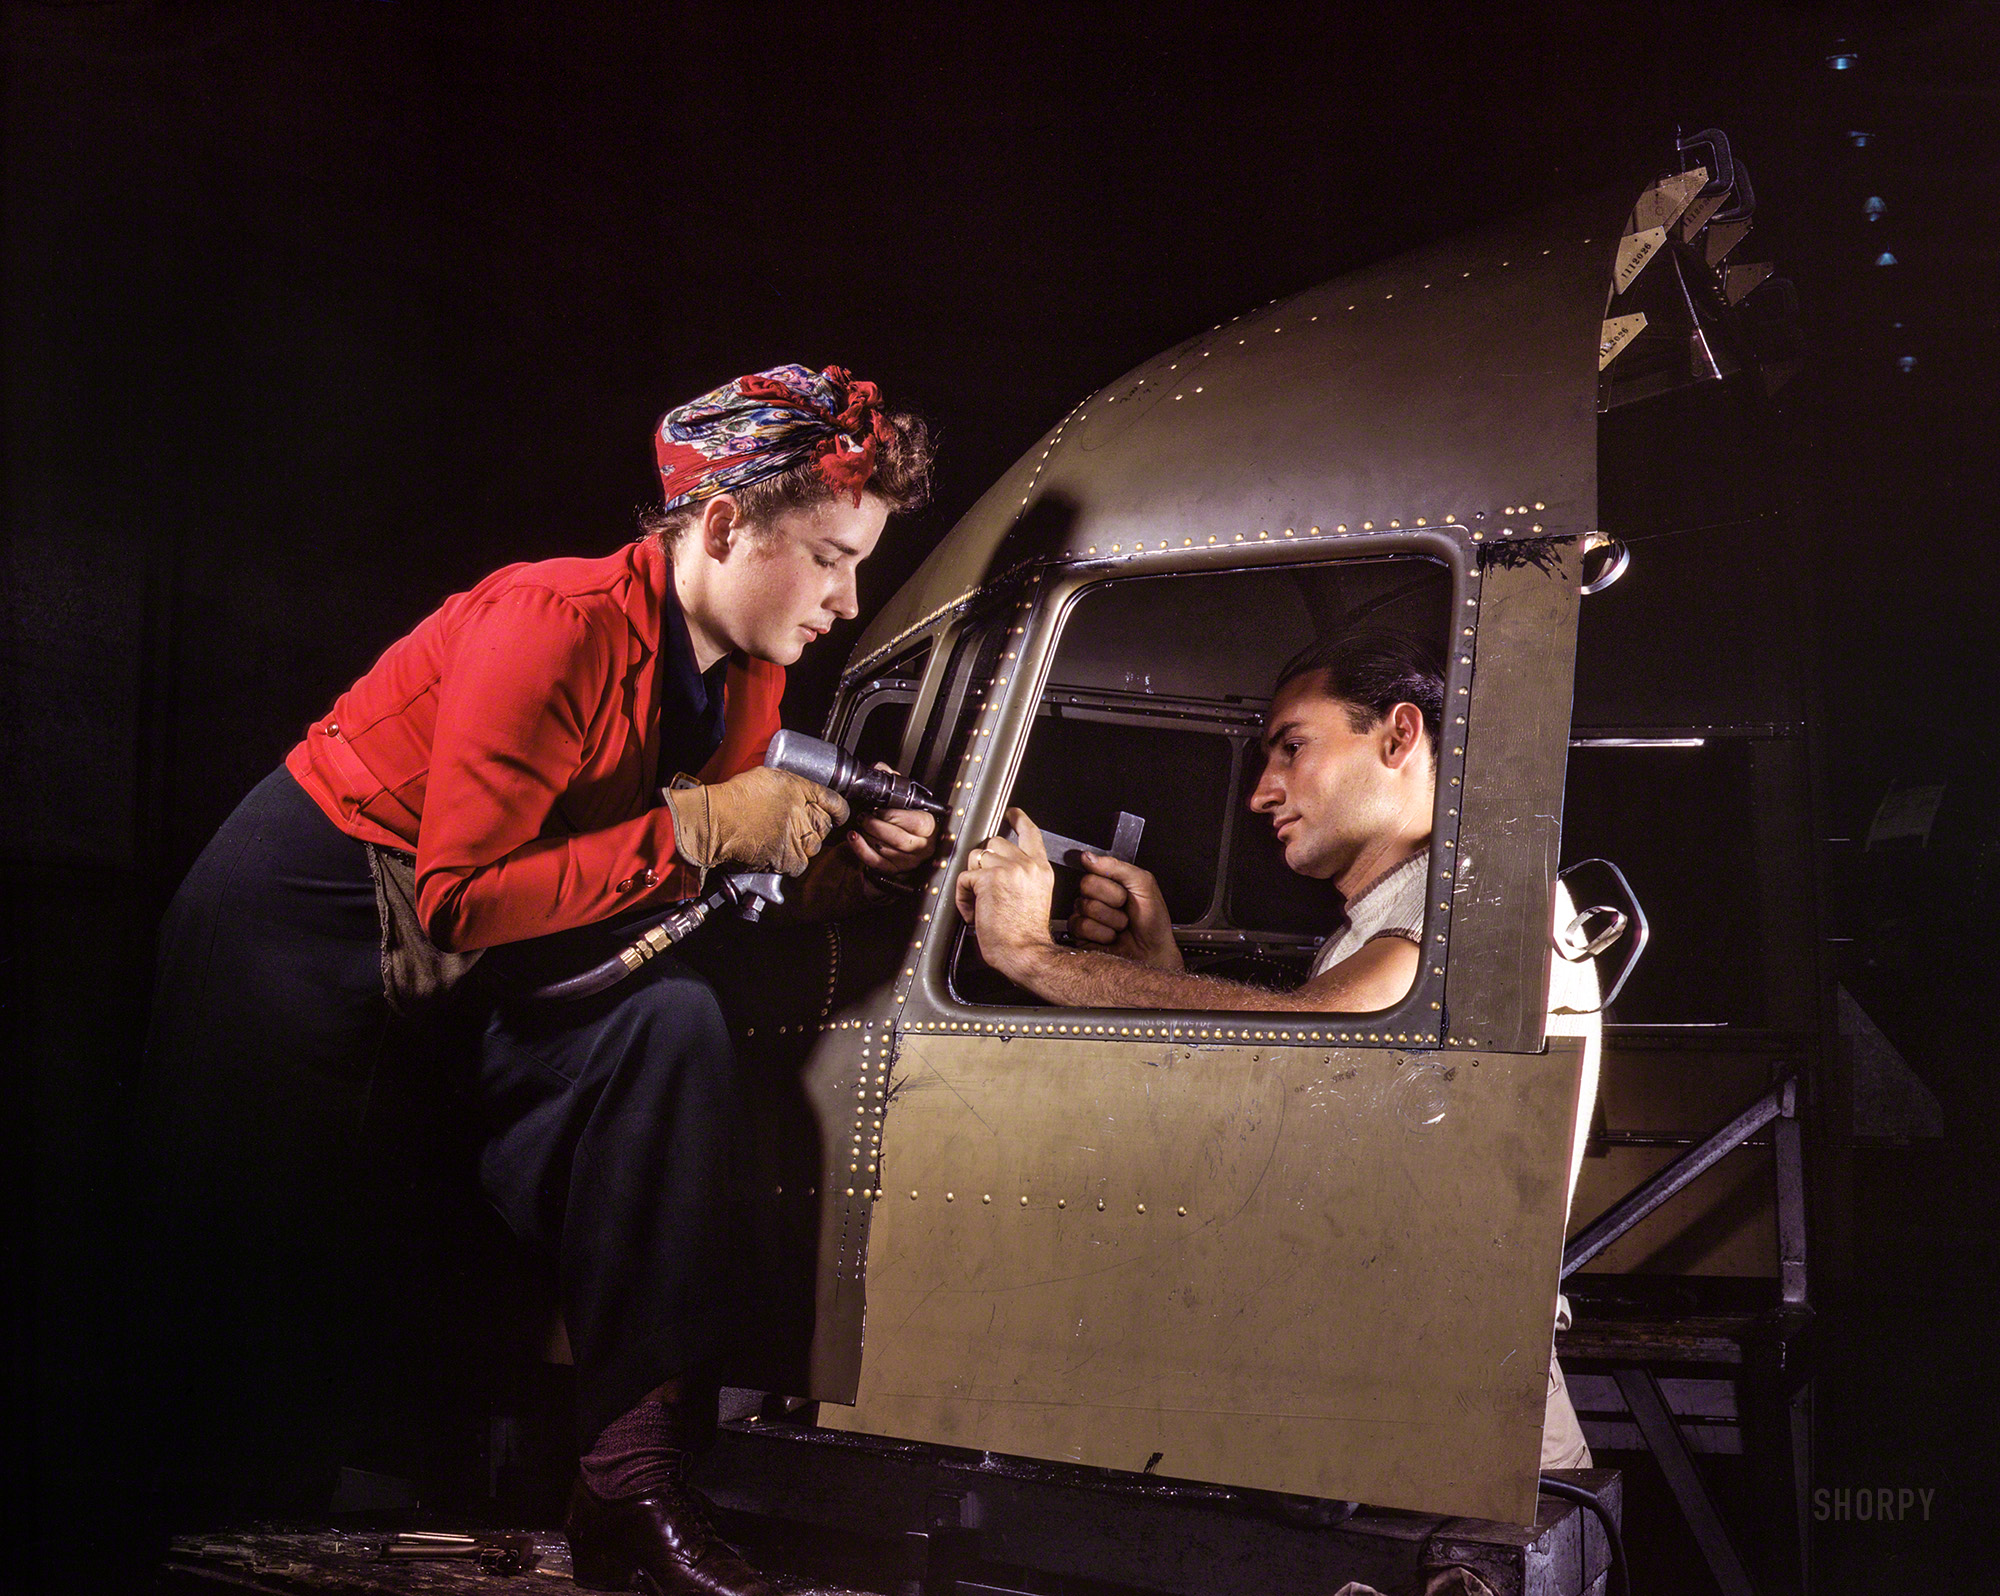 October 1942. "Men and women make efficient operating teams on riveting and other jobs at the Douglas Aircraft plant, Long Beach, Calif. Most important of the many types of aircraft made at this plant are the B-17F 'Flying Fortress' heavy bomber, the A-20 'Havoc' assault bomber and the C-47 heavy transport plane shown here for the carrying of troops and cargo." 4x5 inch Kodachrome transparency by Alfred Palmer for the Office of War Information. View full size.